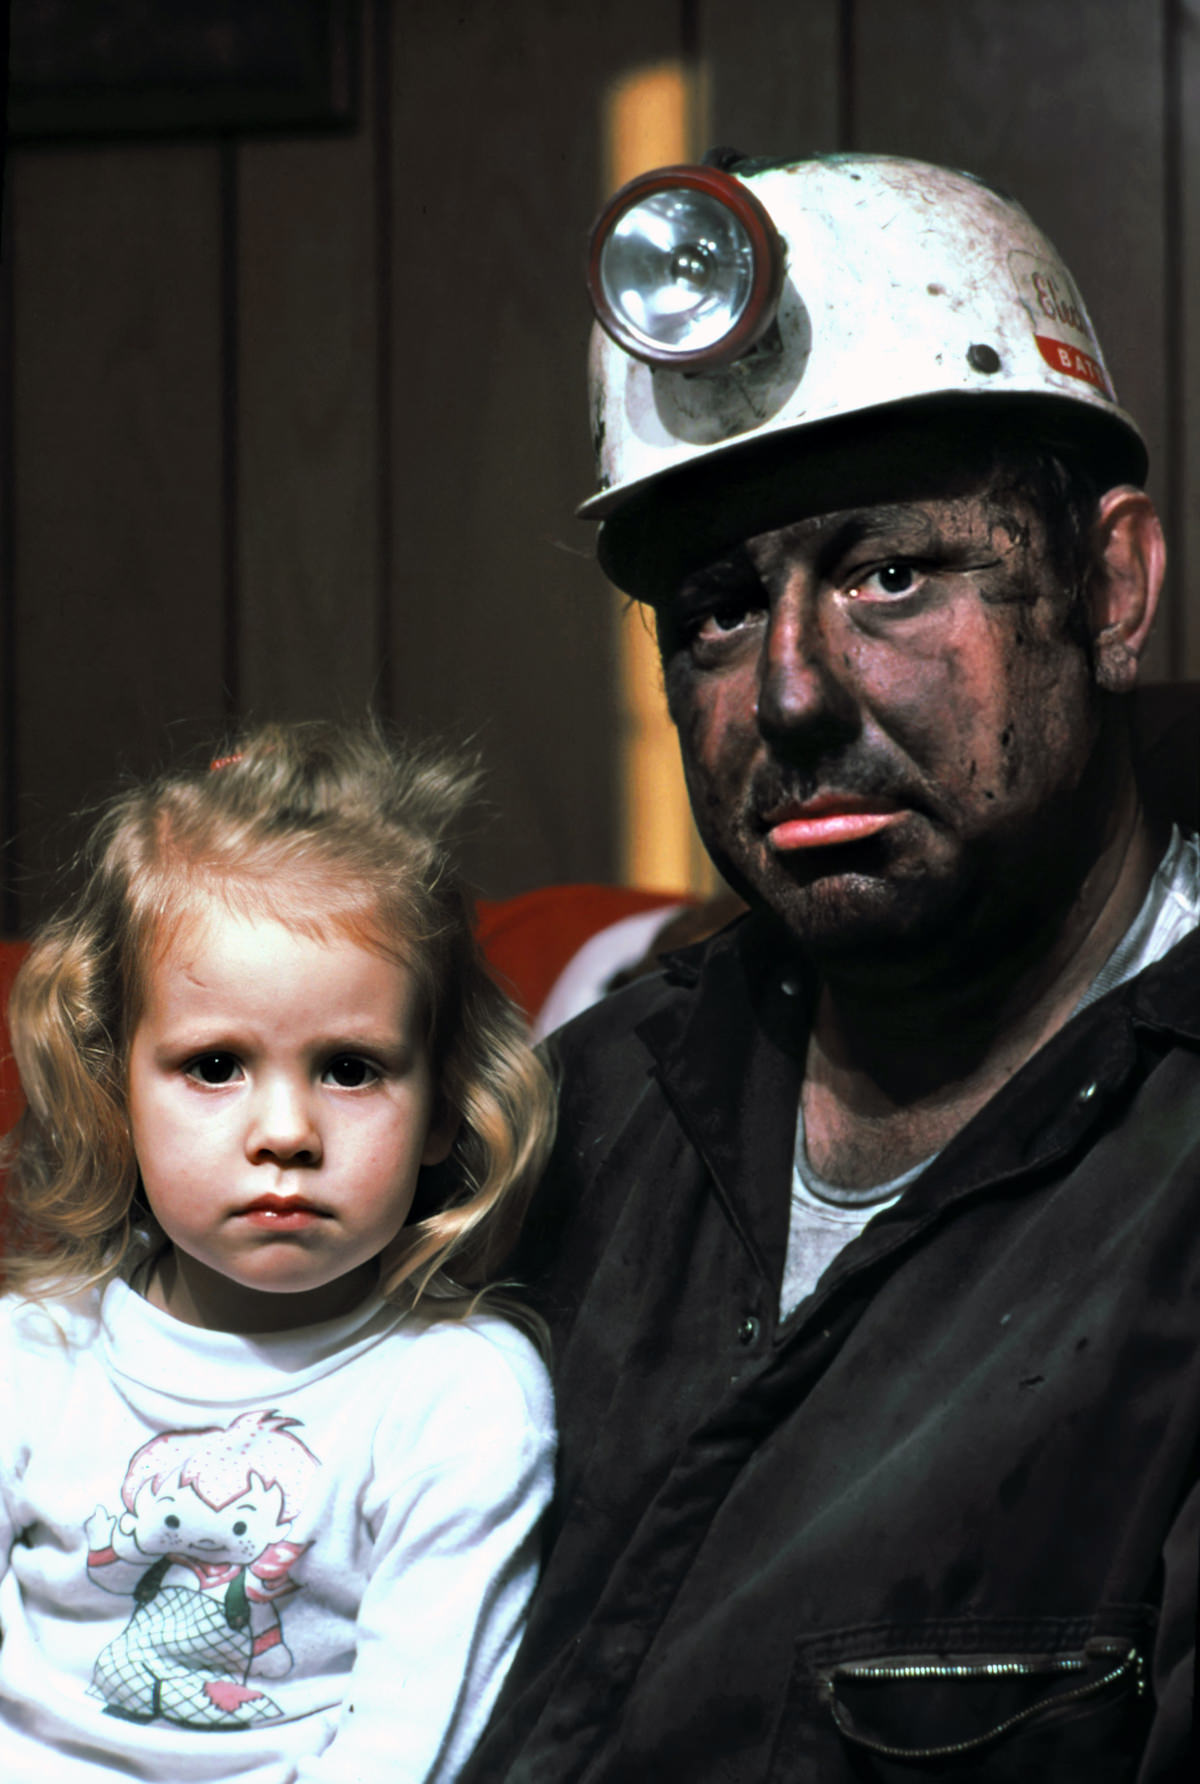 Miner Wayne Gipson, 39, with his daughter Tabitha, 3. He has just gotten home from his job as a conveyor belt operator in a non-union mine.